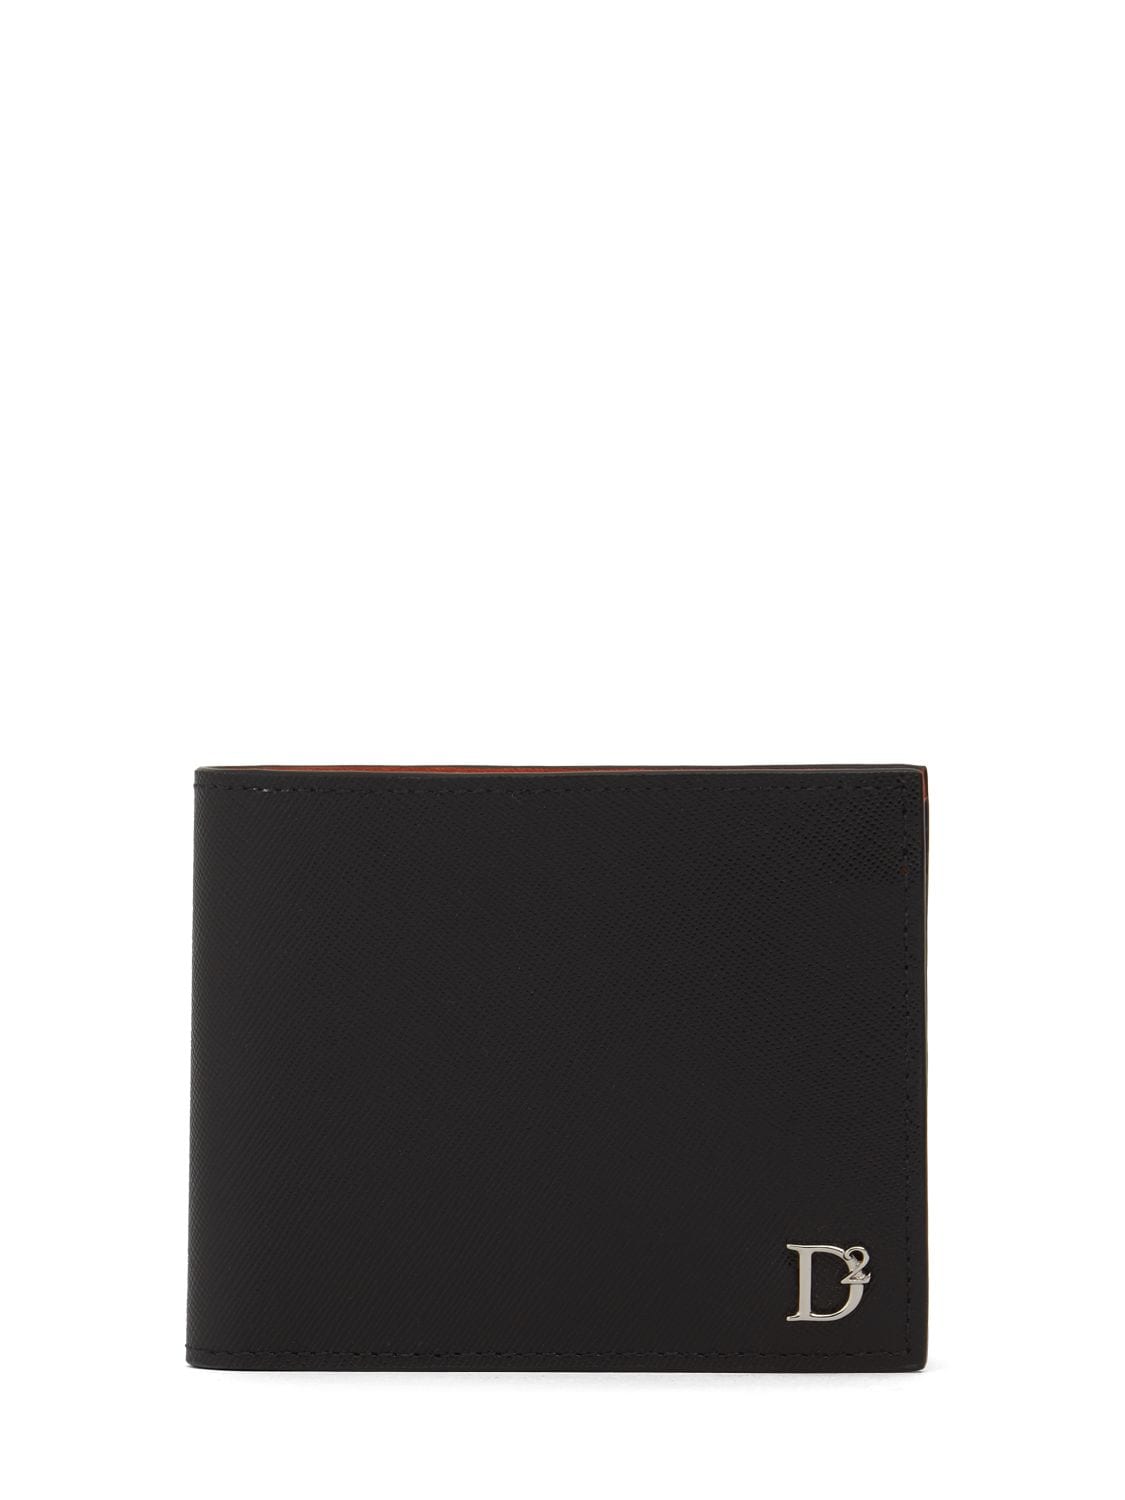 Image of D2 Statement Wallet